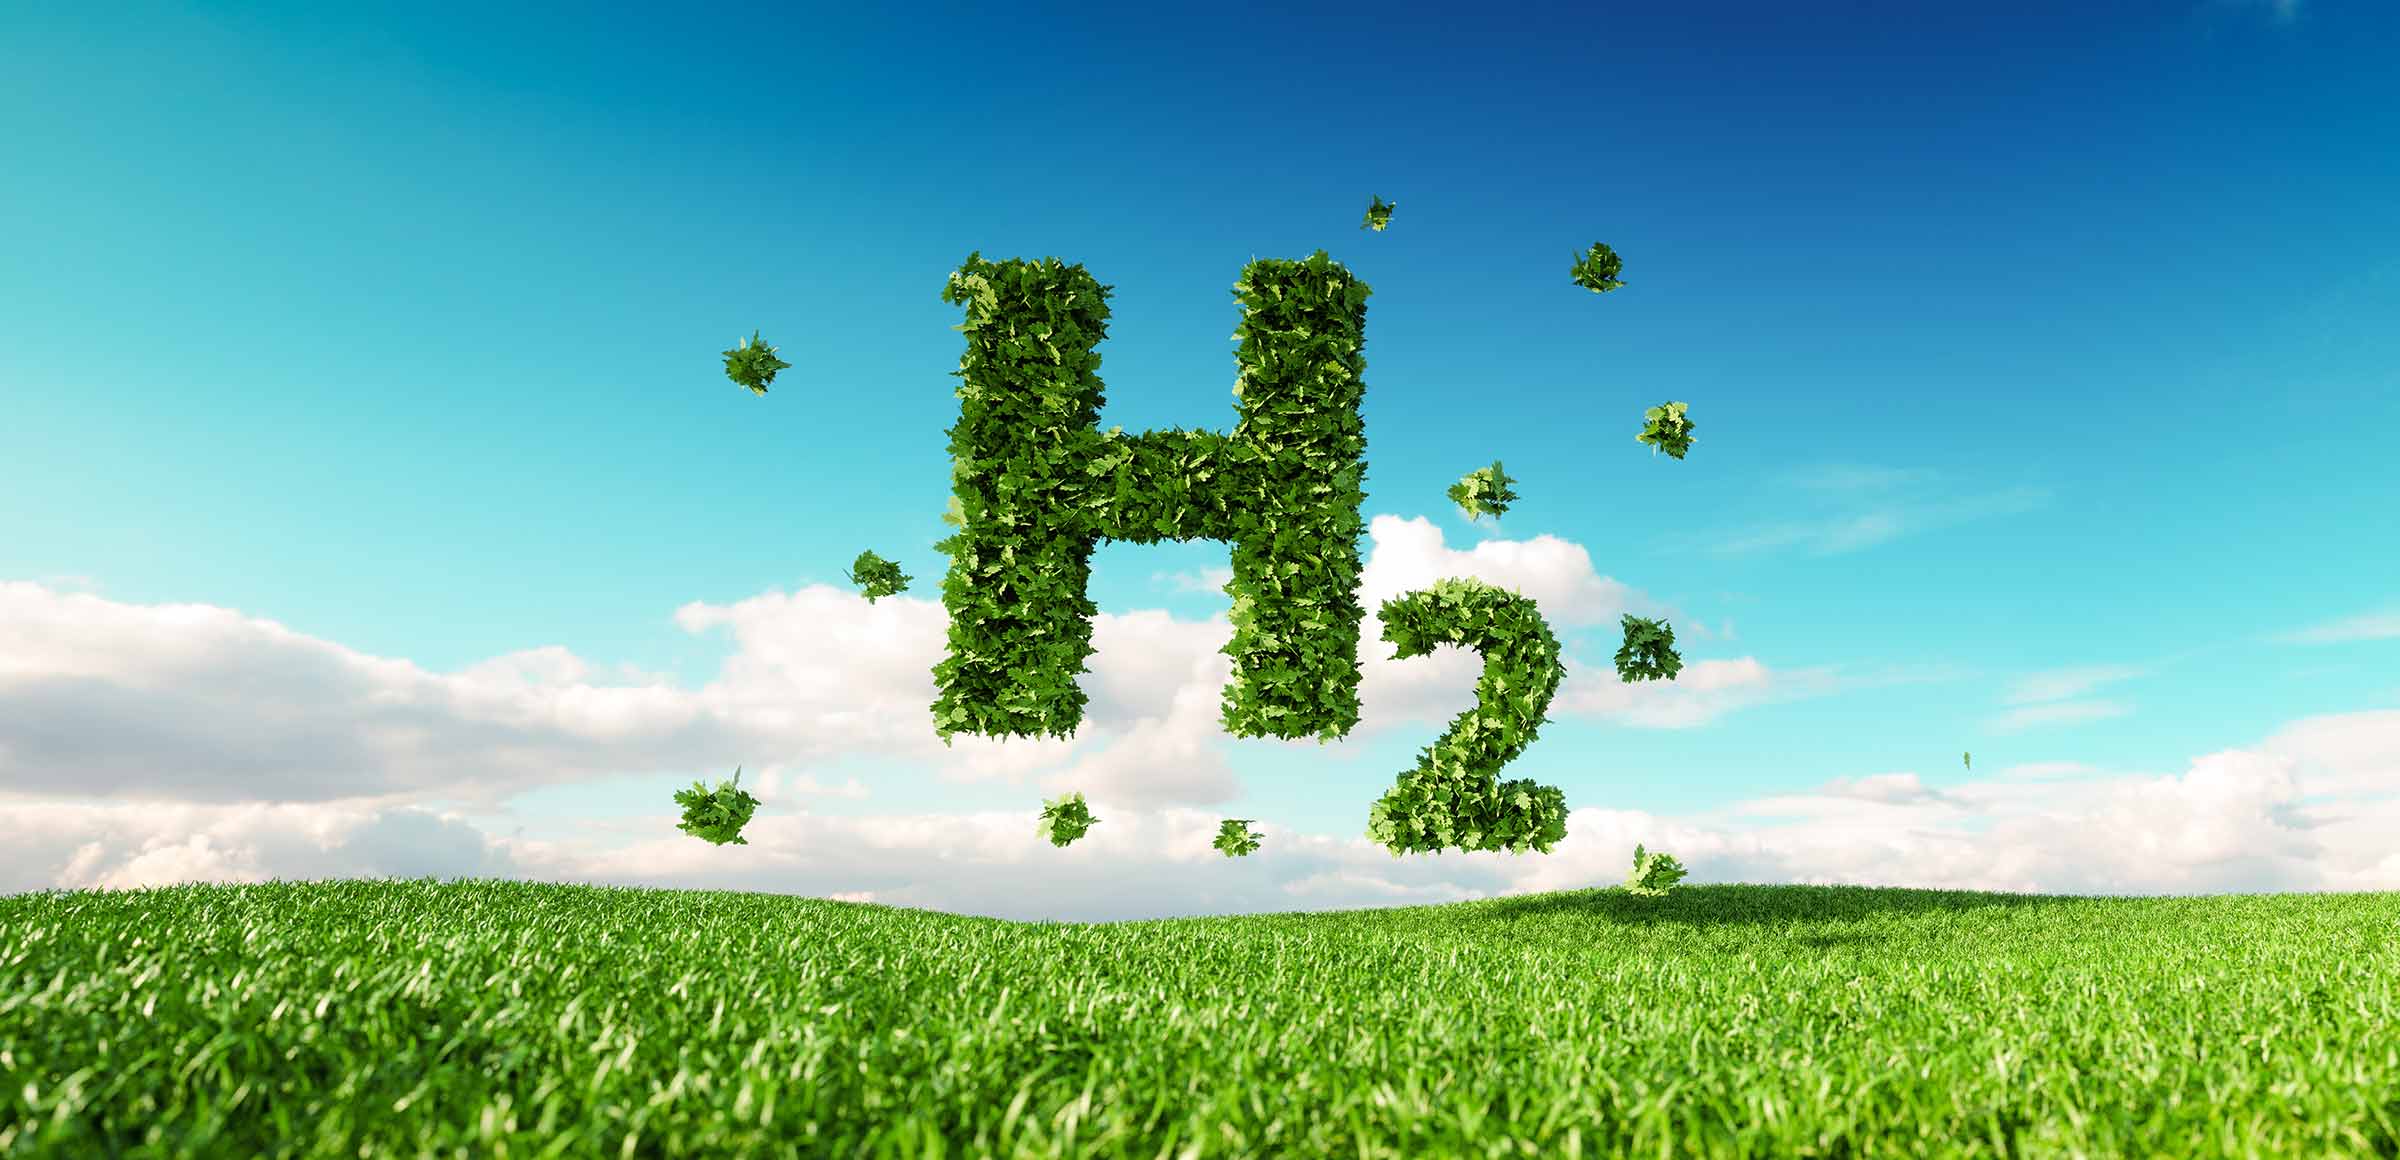 An image showing H2 made of green grass and leaves